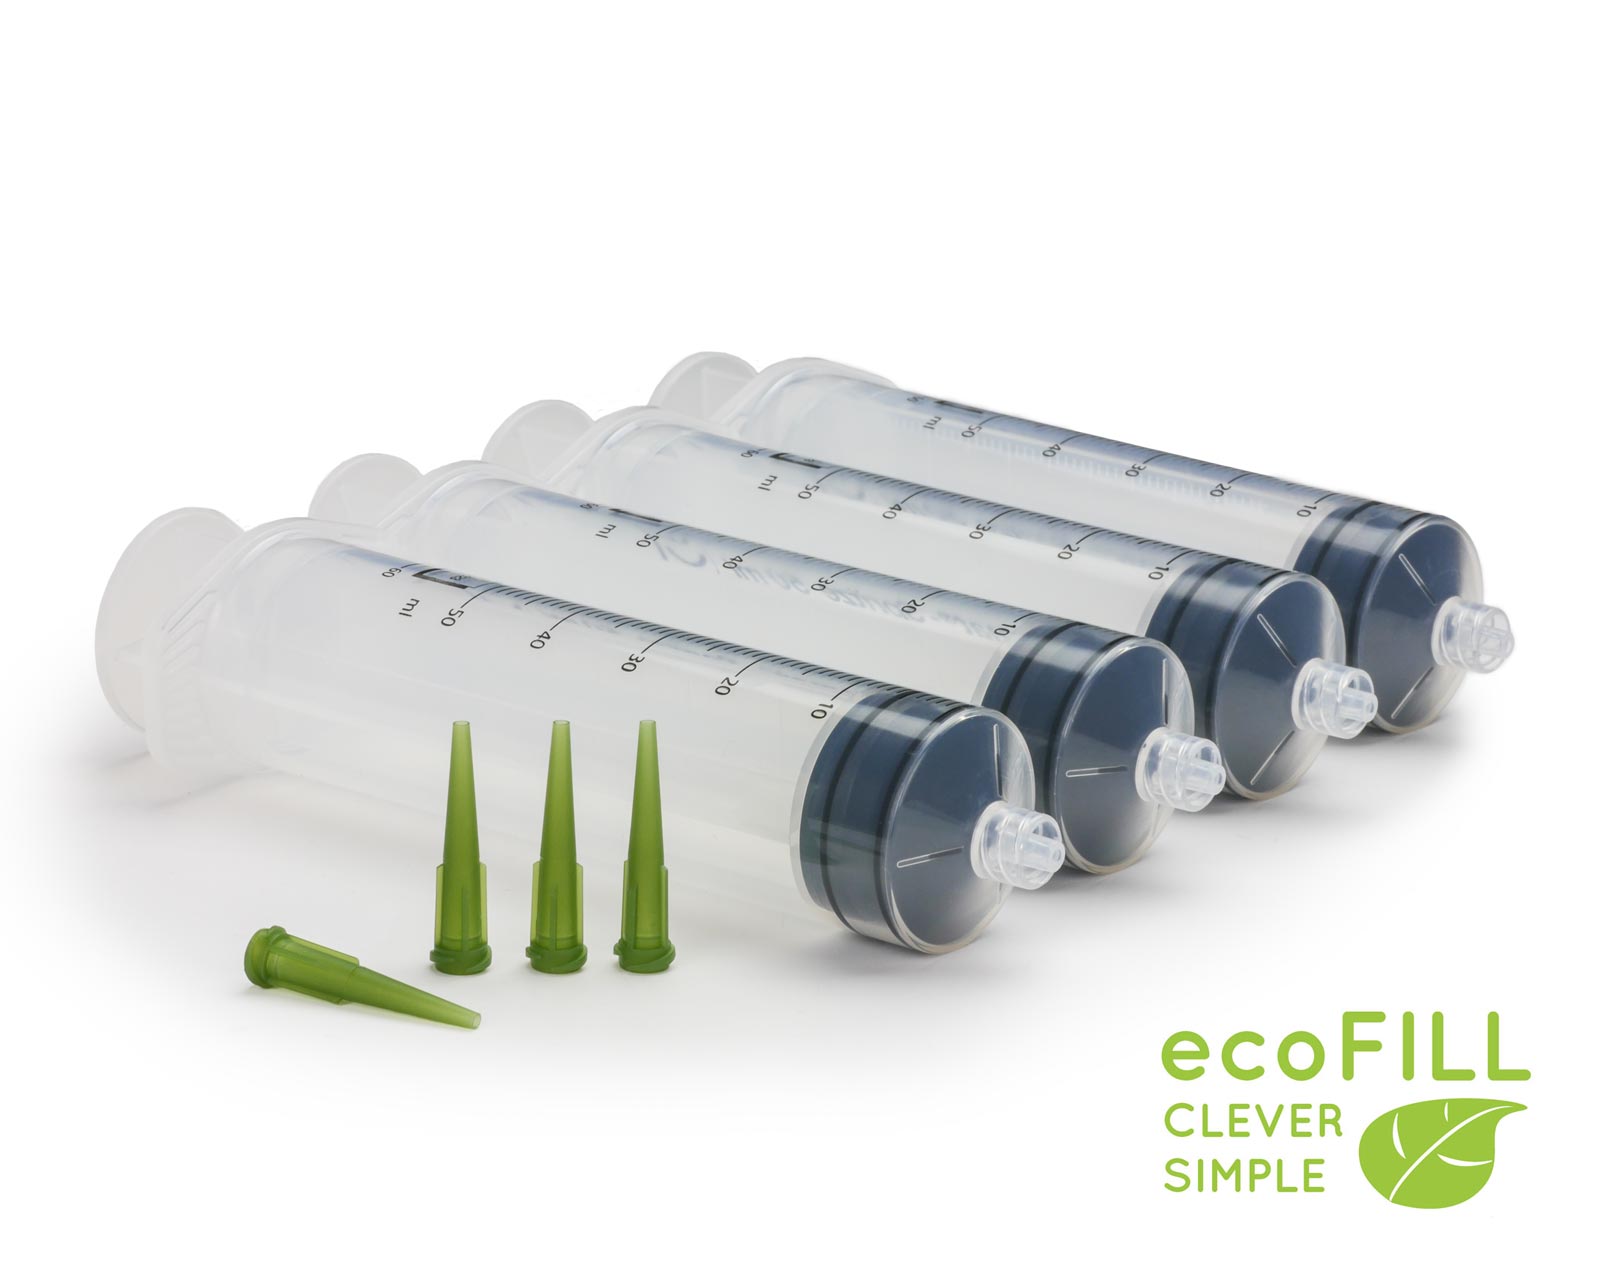 ECO-FILL set of syringes with filling tips